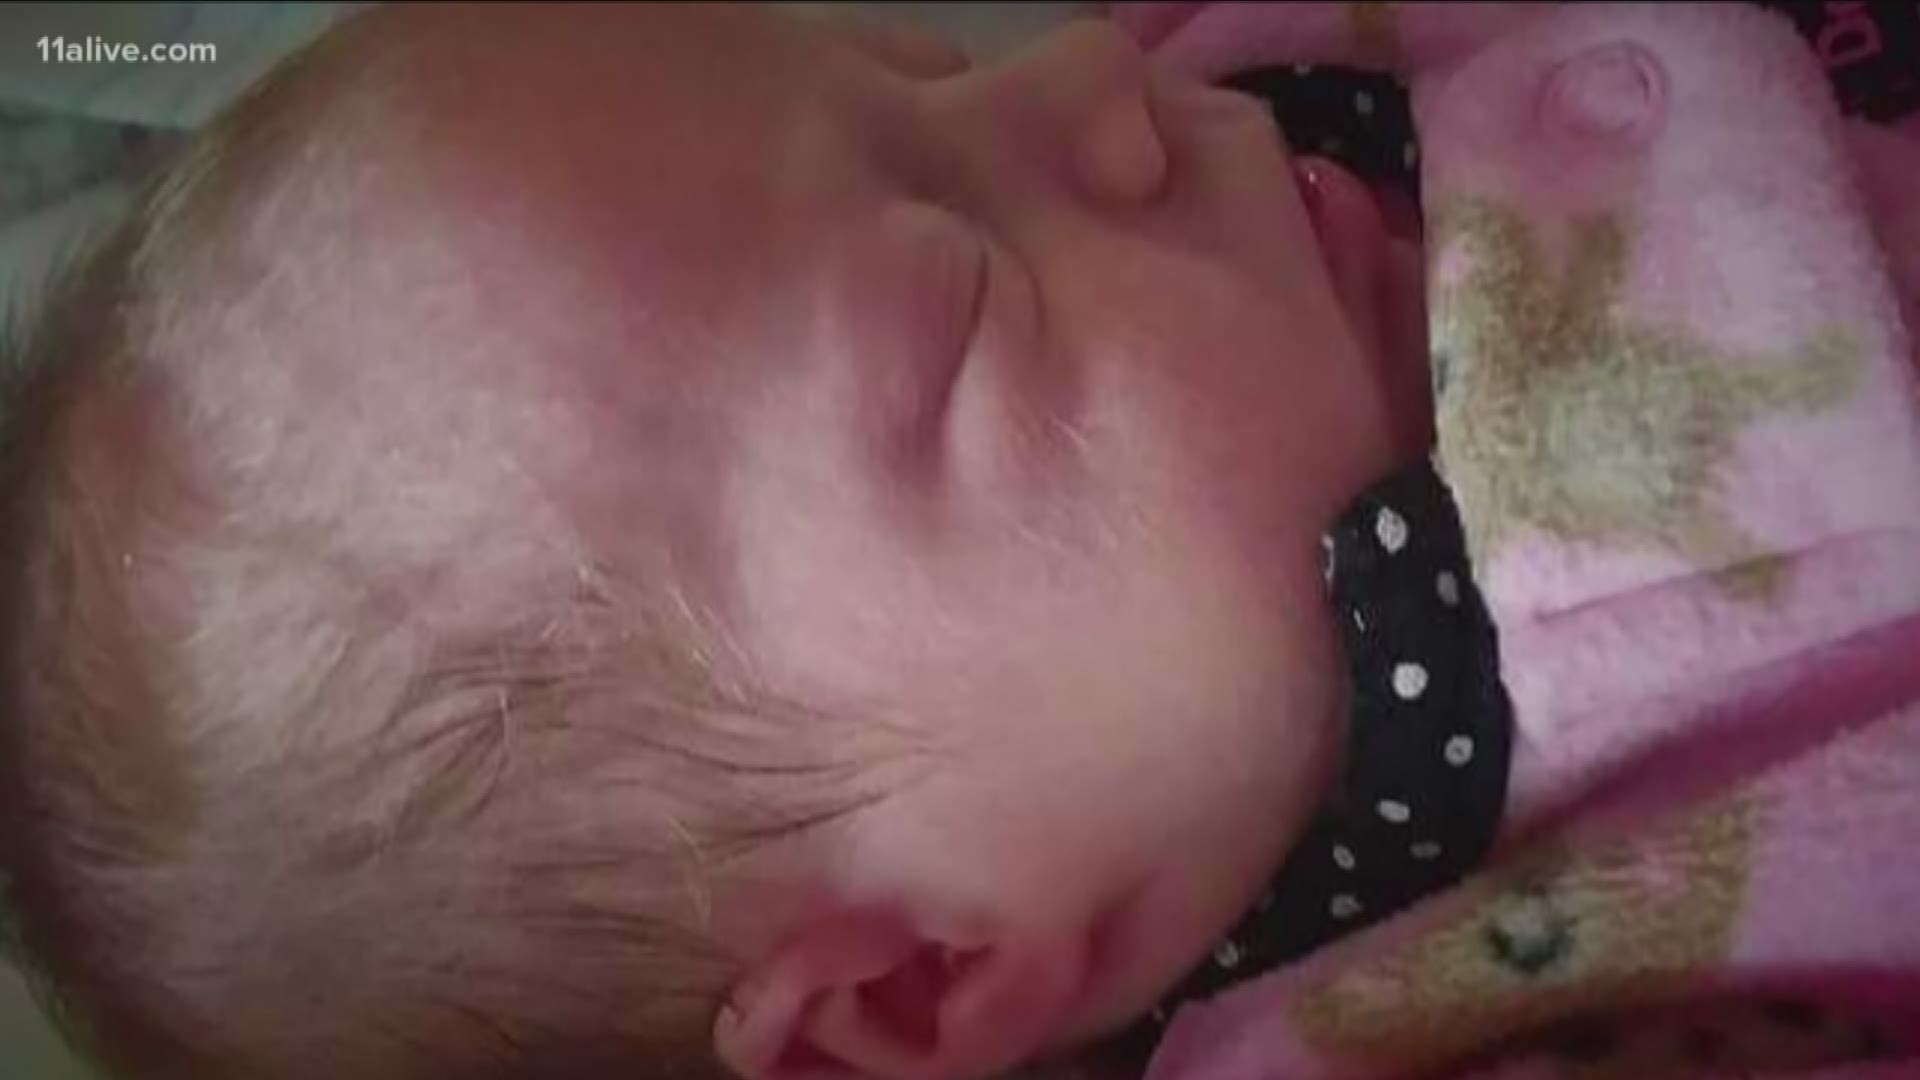 Little Caliyah McNabb weighed only 5 pounds at birth. Less than three weeks later her lifeless body was found under a log in Newton County.